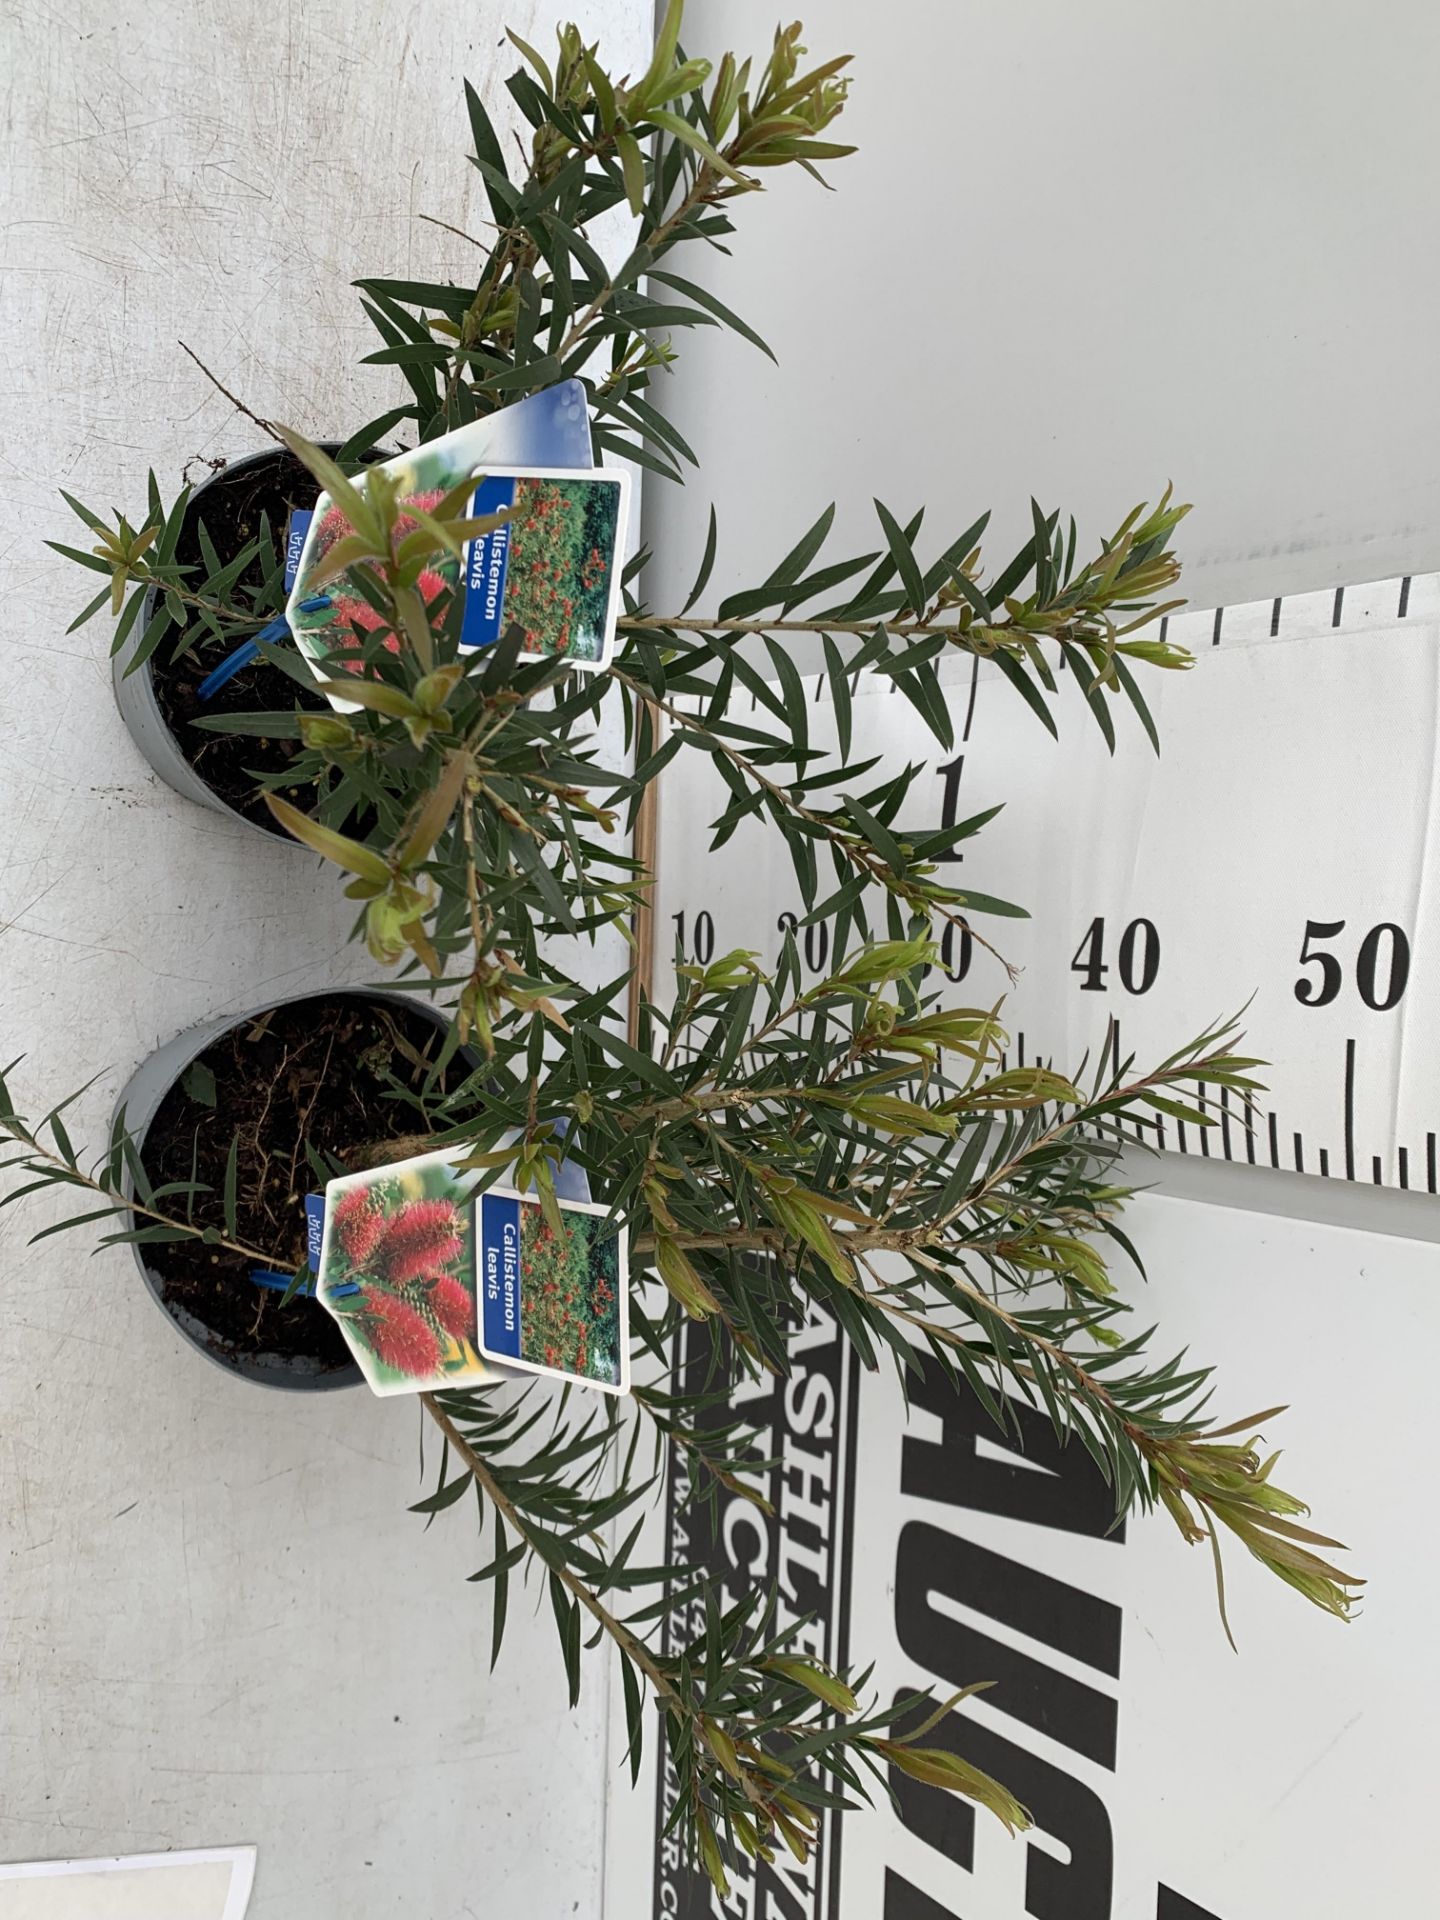 TWO CALLISTEMON LAEVIS IN 2 LTR POTS 50CM TALL PLUS VAT TO BE SOLD FOR THE TWO - Image 3 of 10